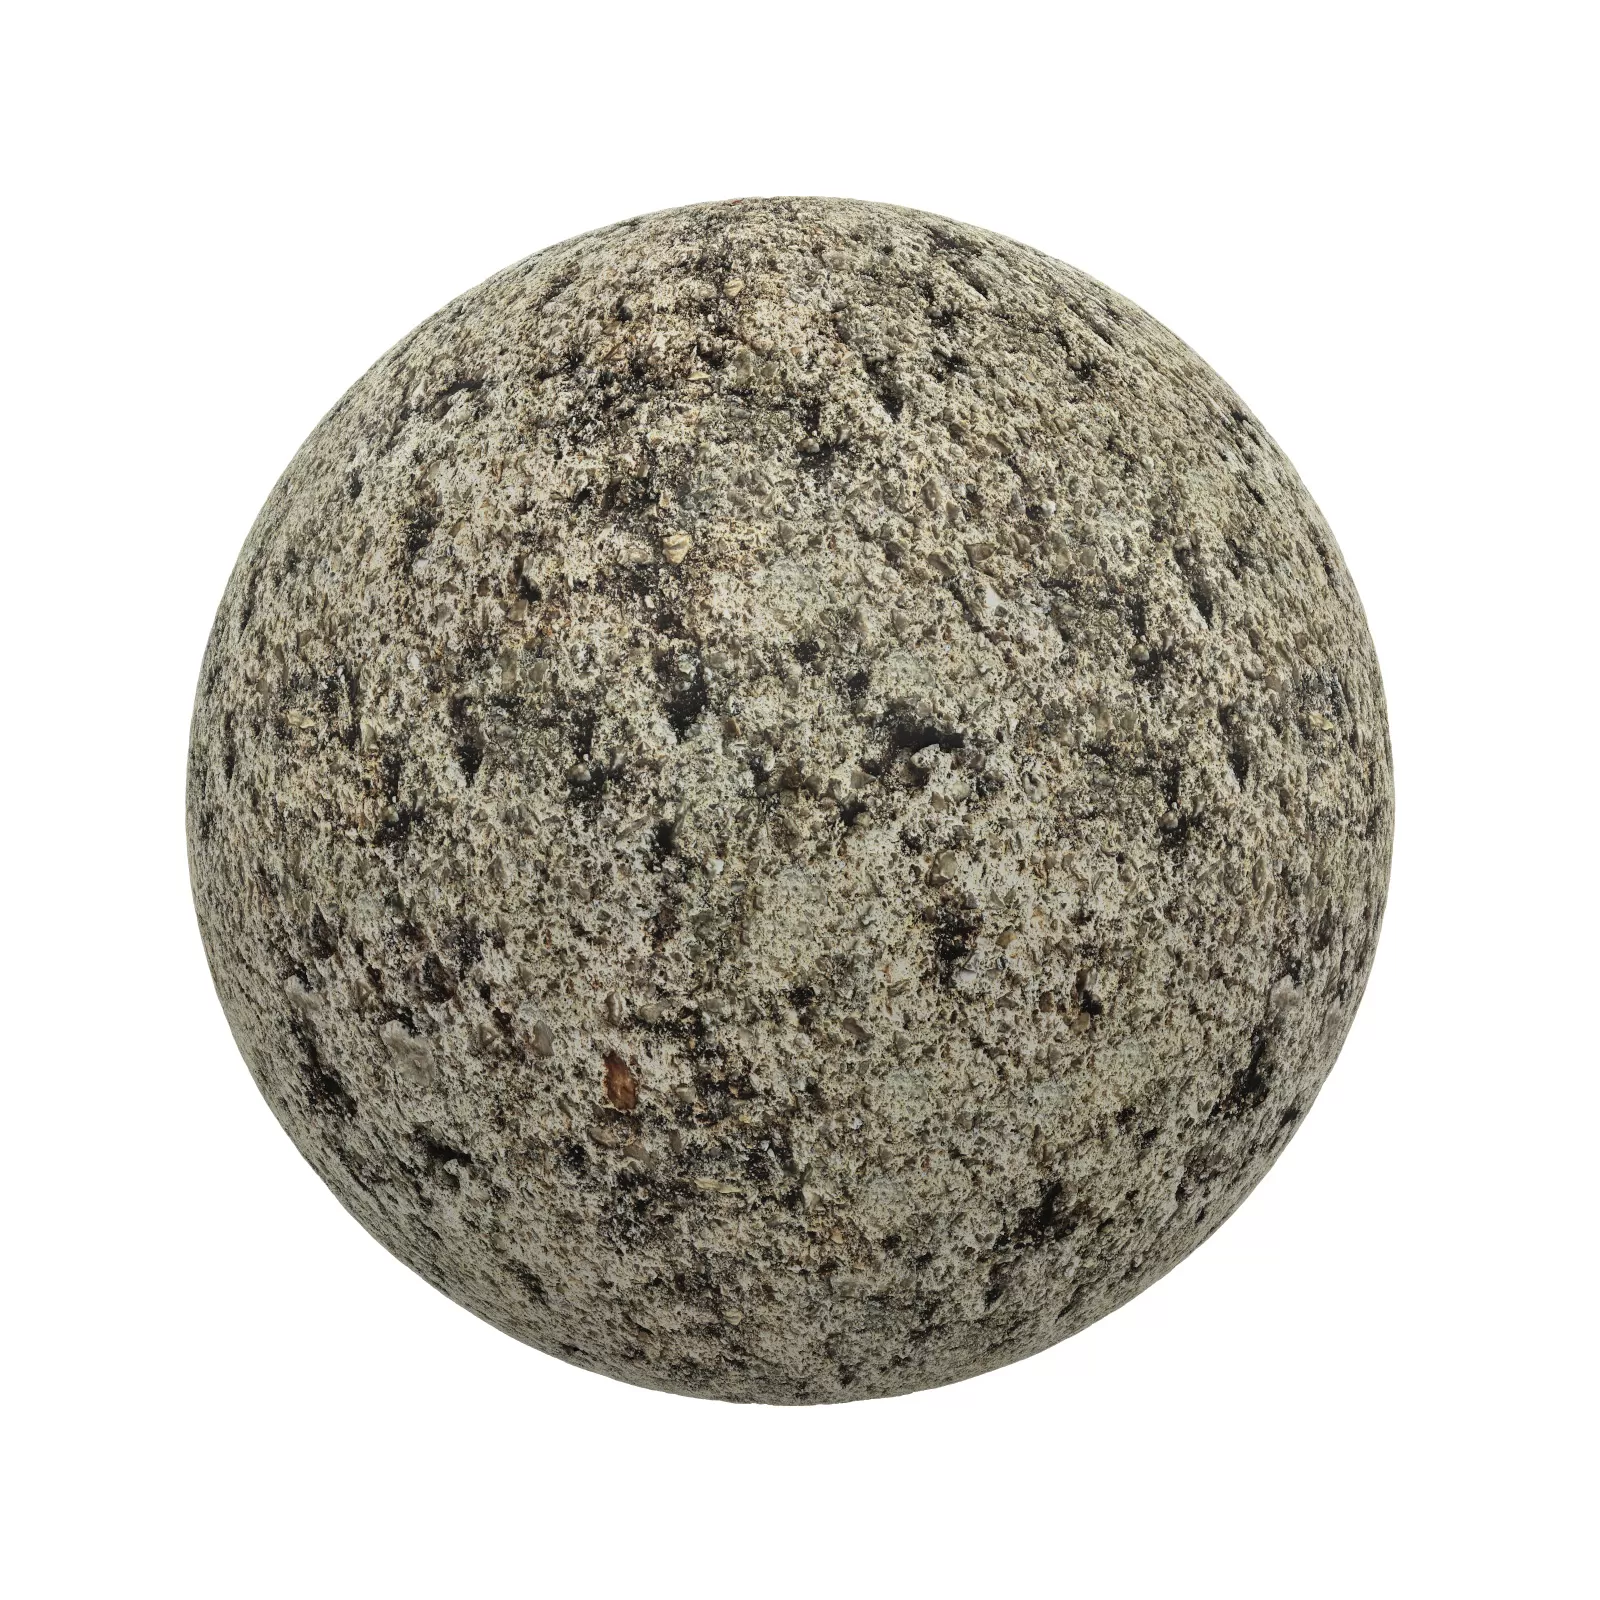 TEXTURES – STONES – CGAxis PBR Colection Vol 1 Stones – rough grey stone 3